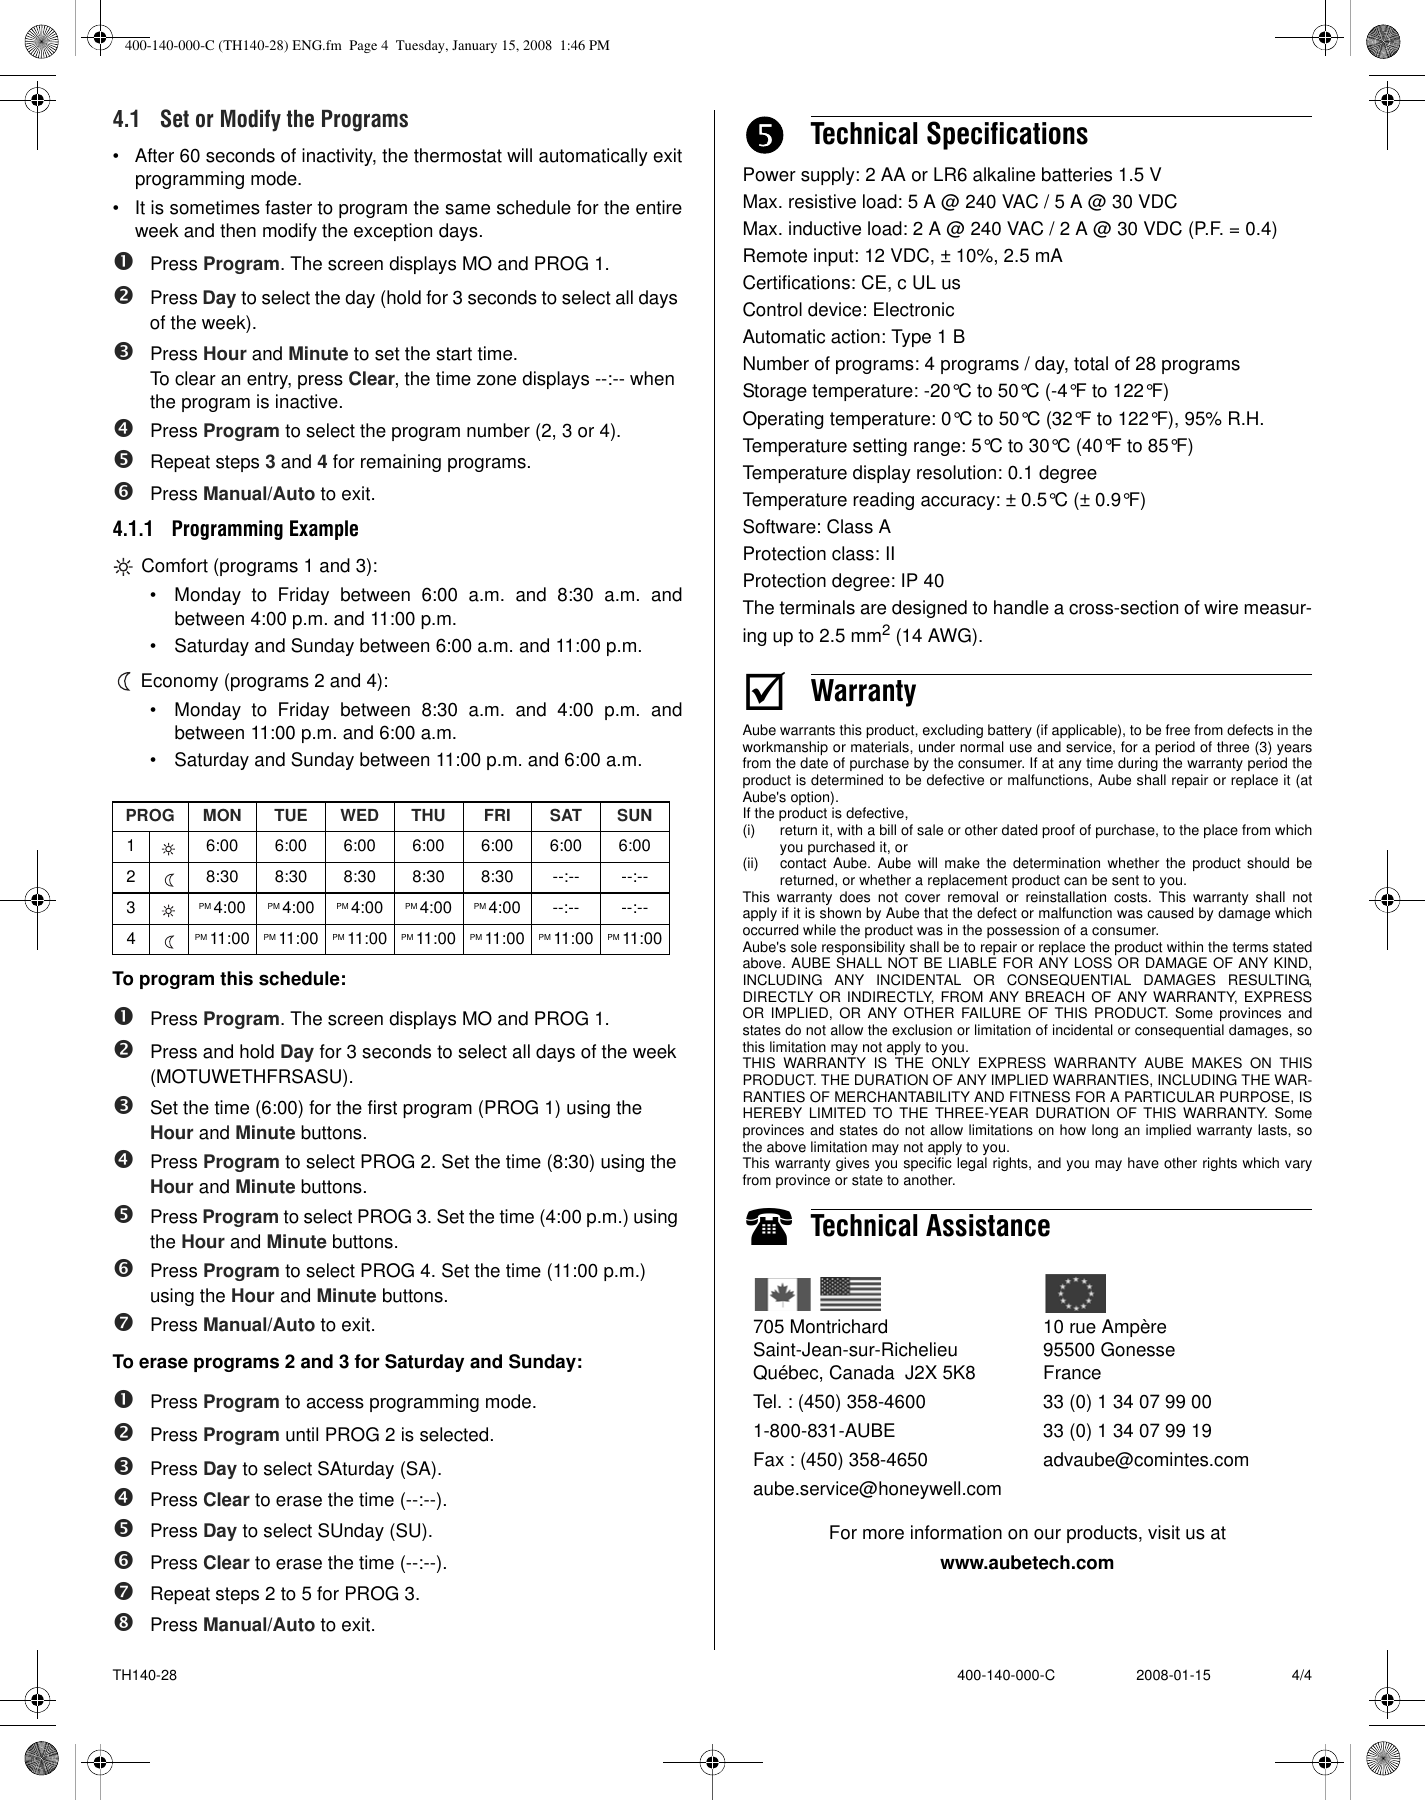 Page 4 of 4 - Aube-Technologies Aube-Technologies-Th140-28-Users-Manual- 400-140-000-C (TH140-28) ENG  Aube-technologies-th140-28-users-manual